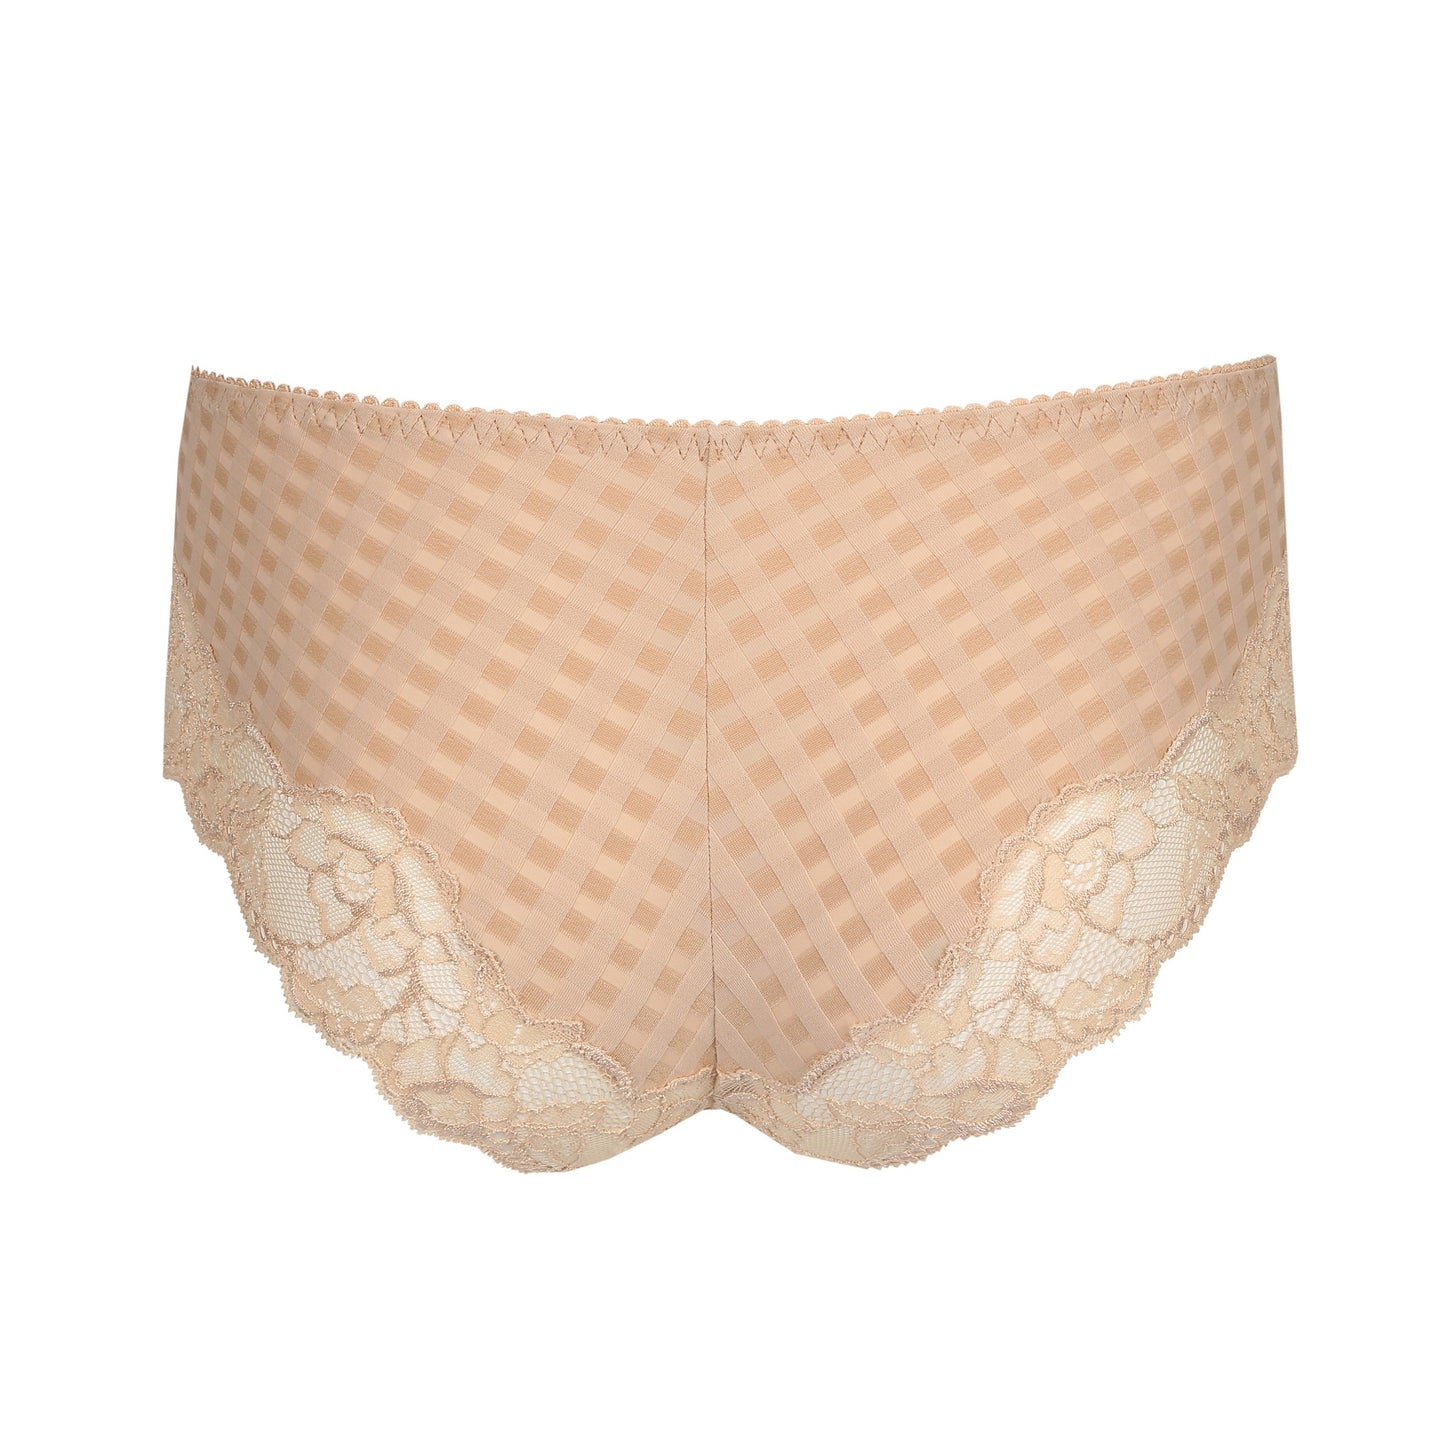 Back view of the Madison cheeky cut panty with lace inserts in Caffe Latte by Primadonna.